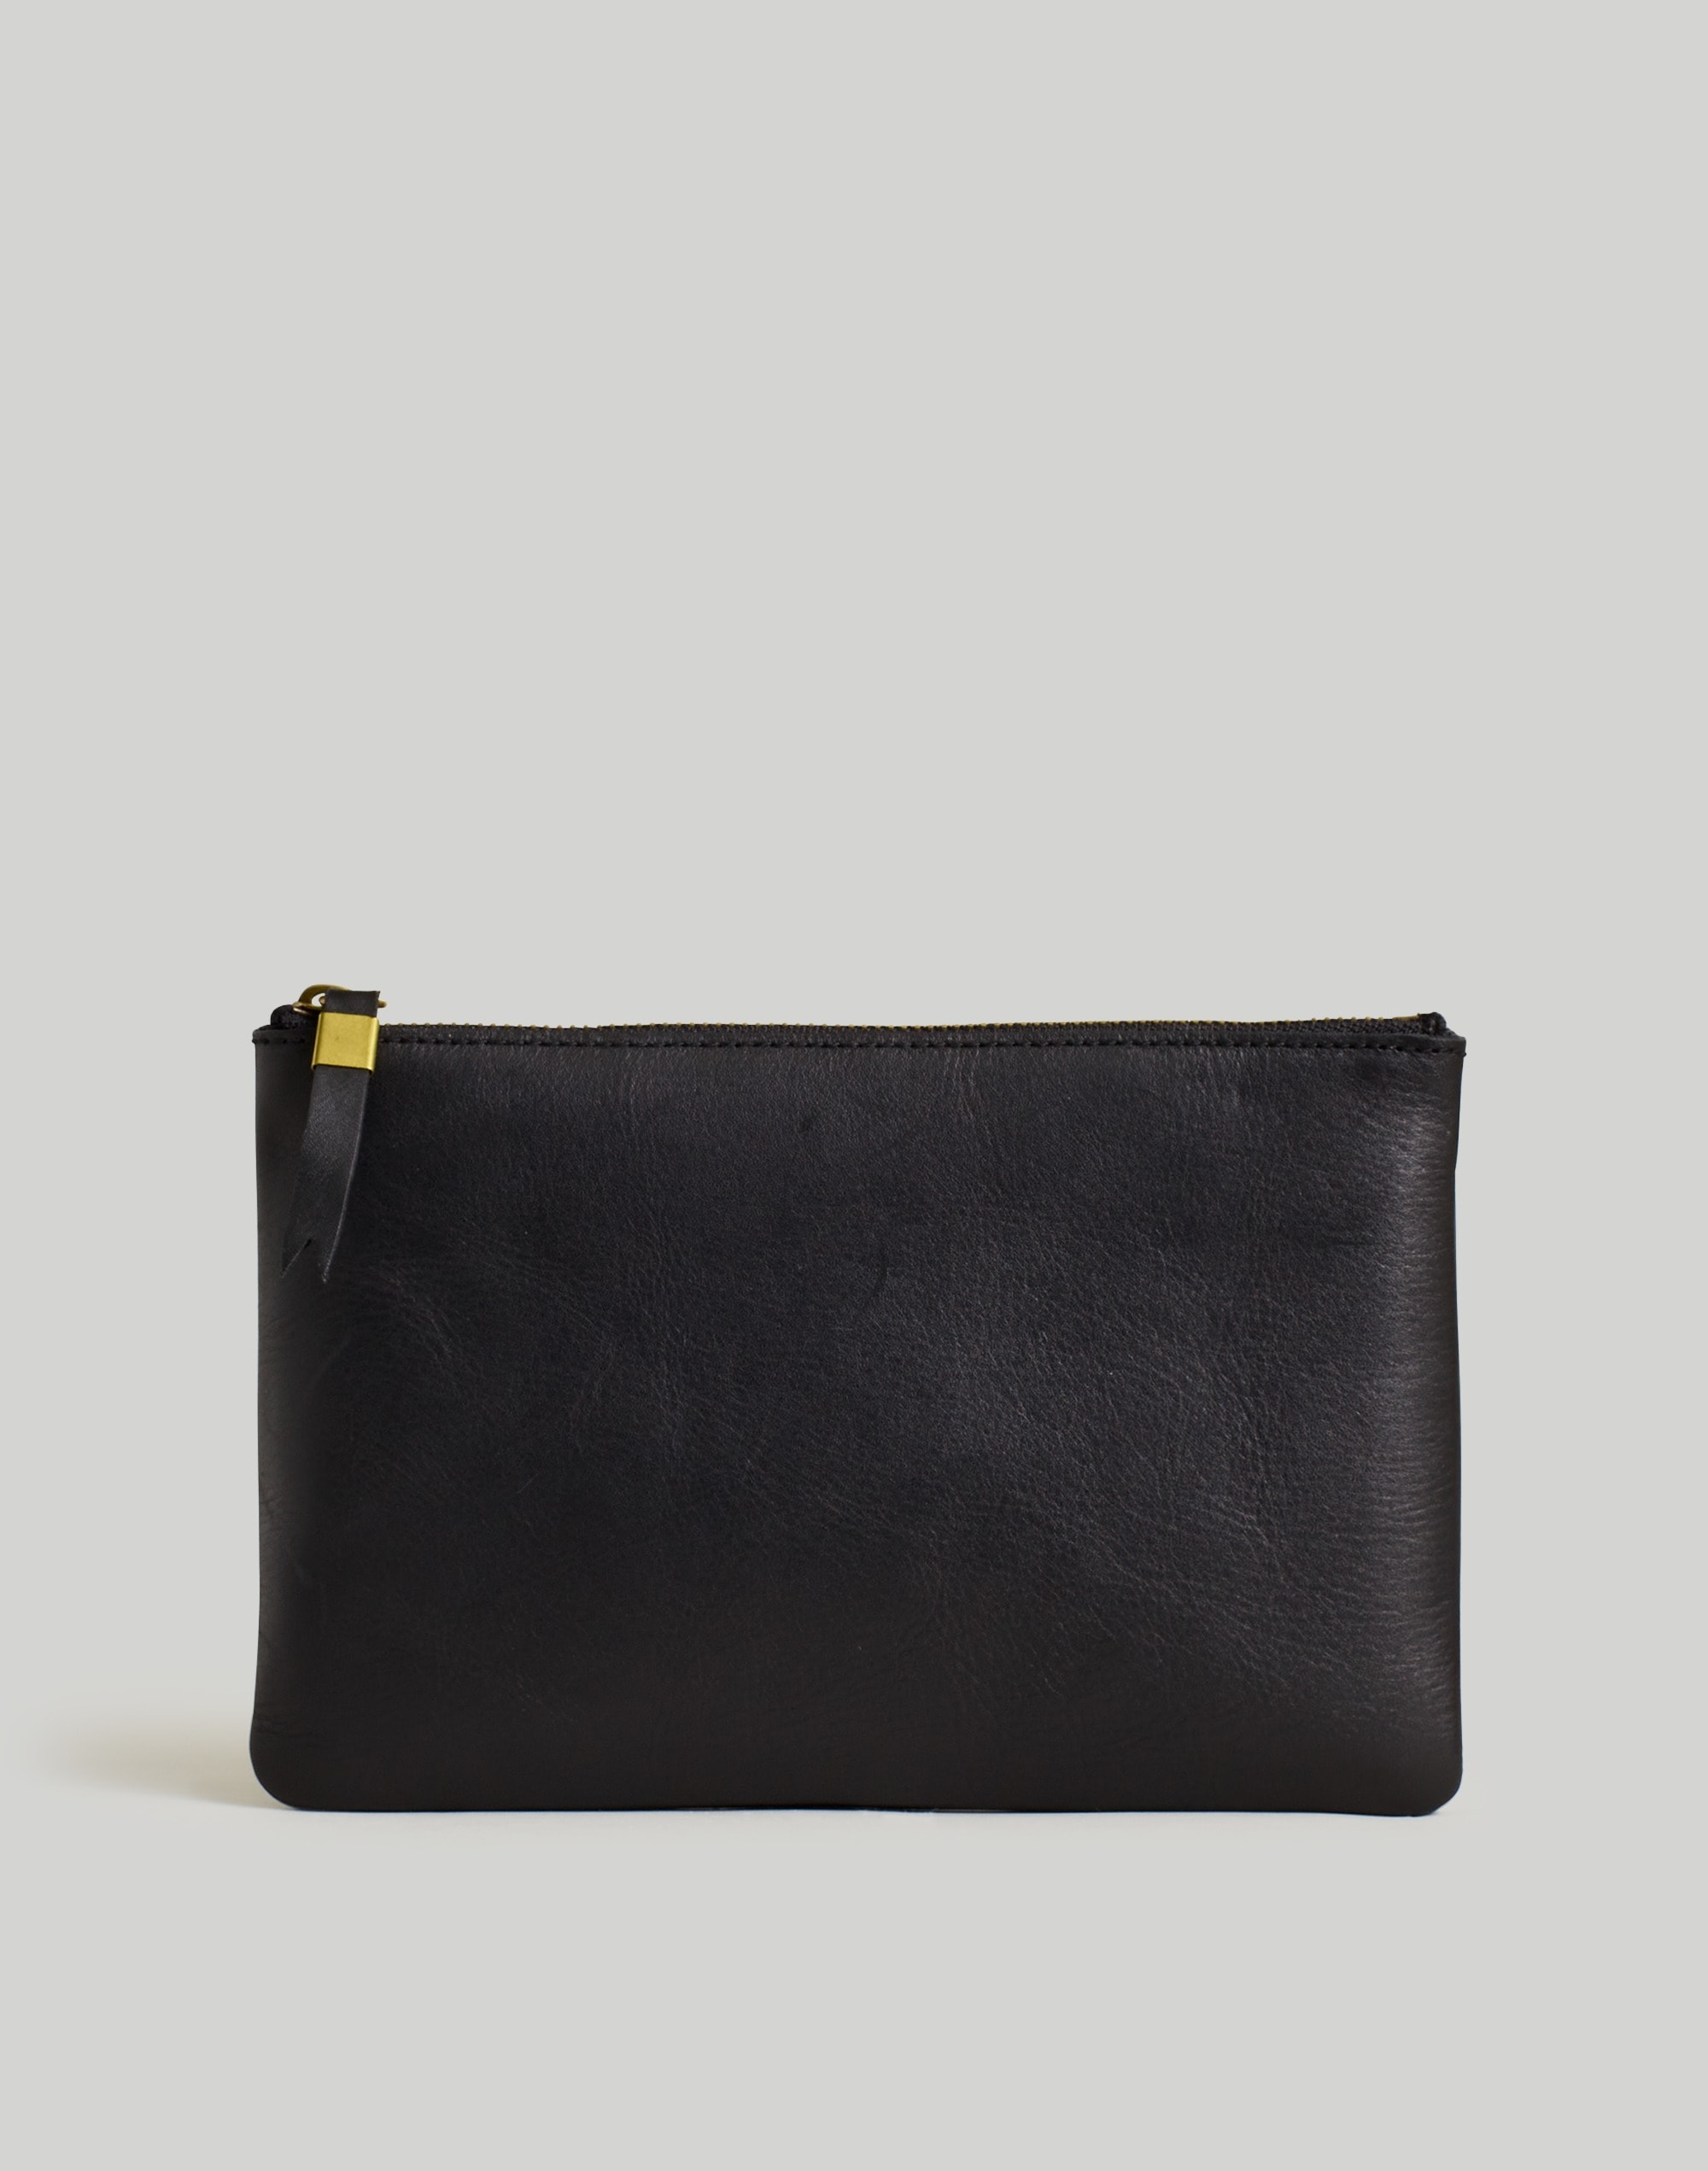 Madewell The Leather Pouch Clutch in True Black - Size One S